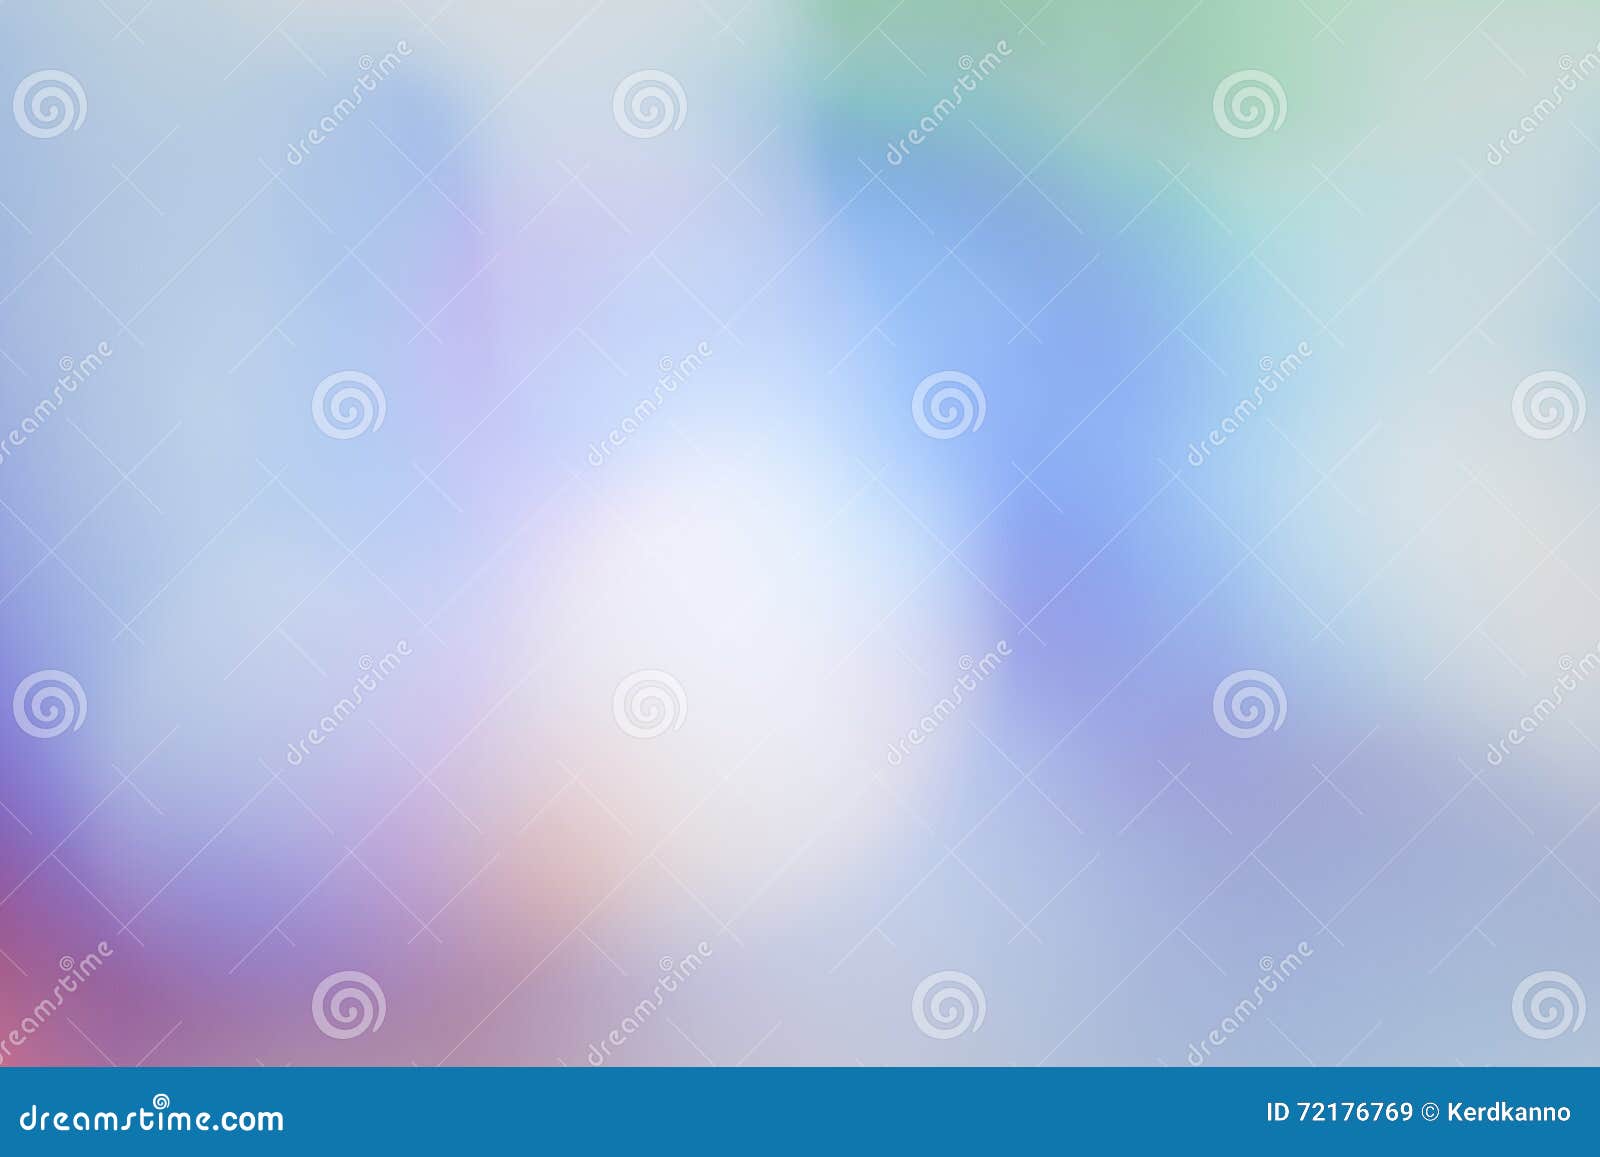 abstract colorful gaussian blur background .colorful defocused l